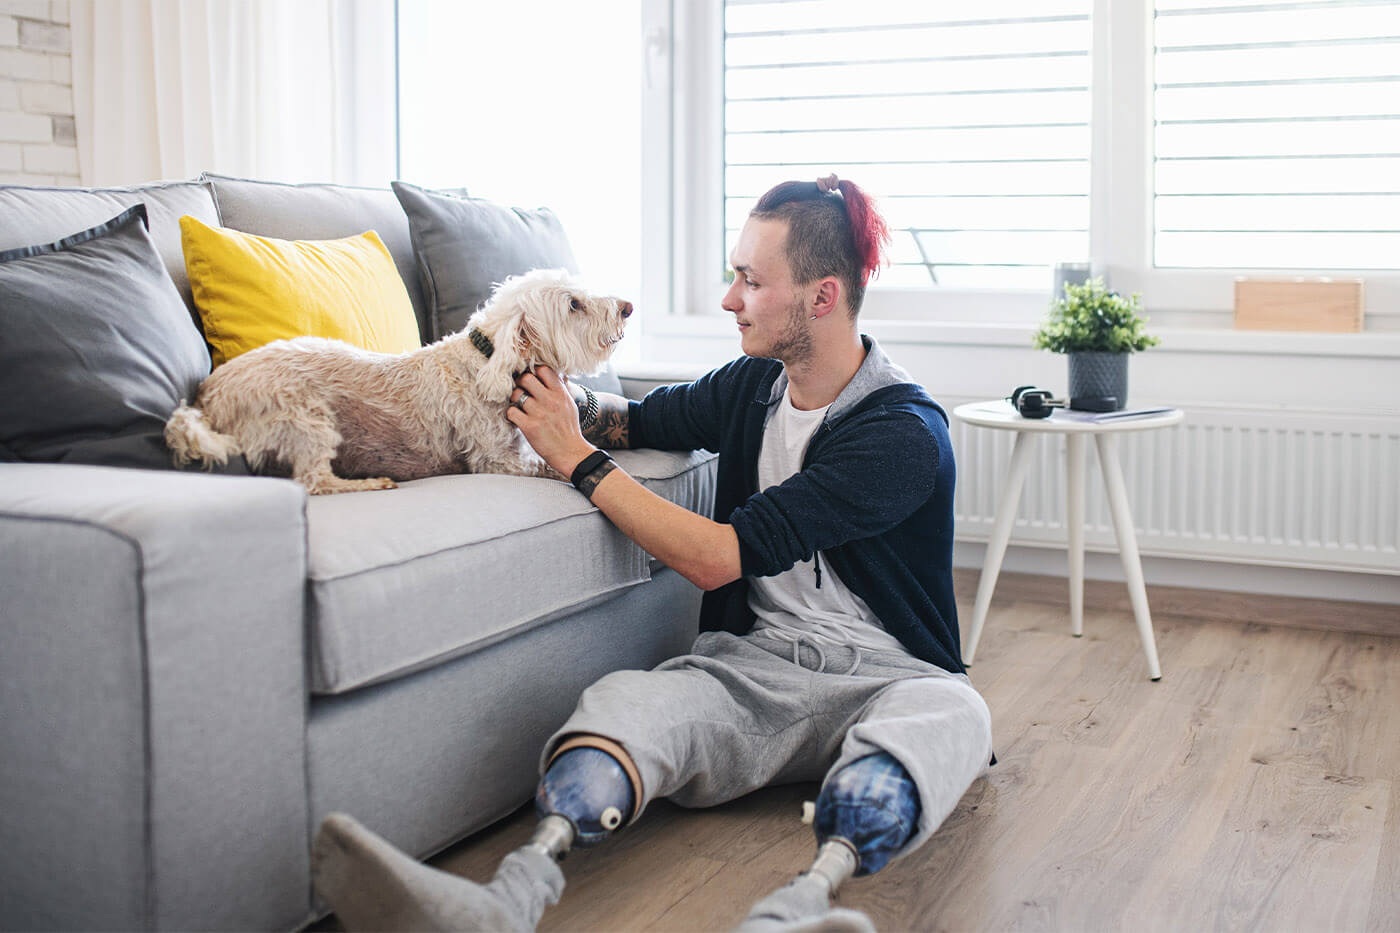 Man With Prosthetic Limbs In Livingroom With Dog